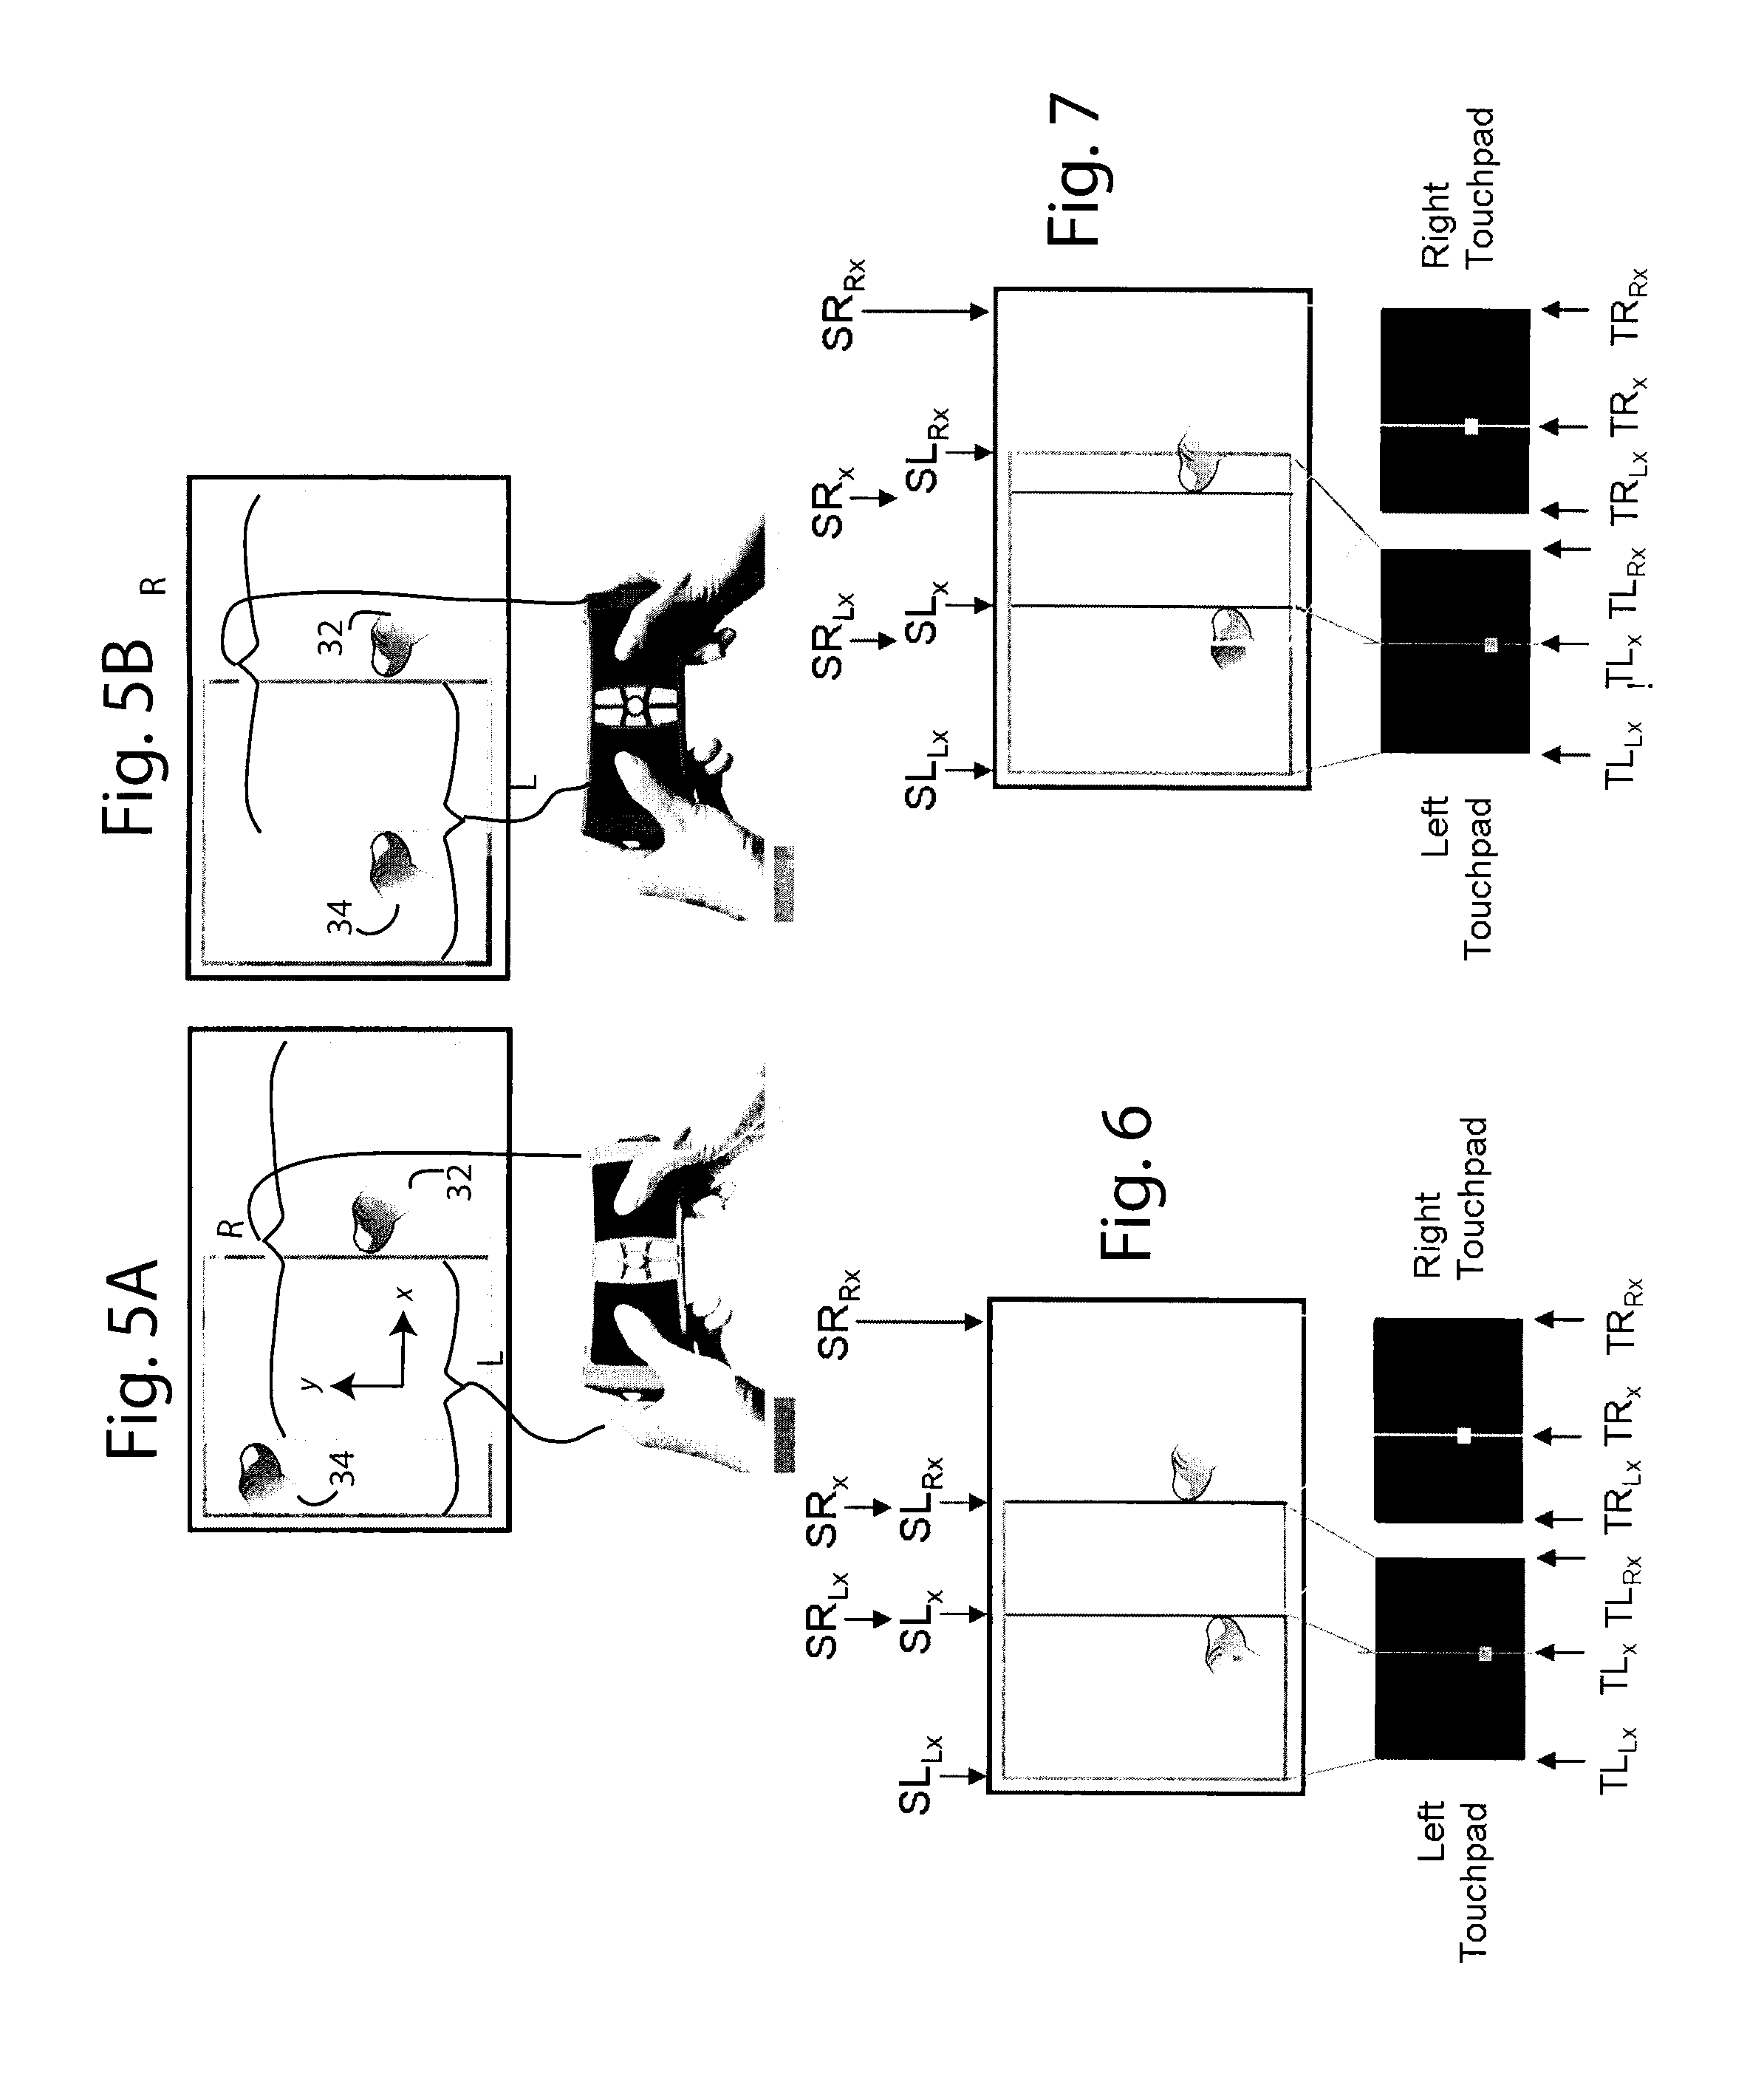 Dual pointer management method using cooperating input sources and efficient dynamic coordinate remapping